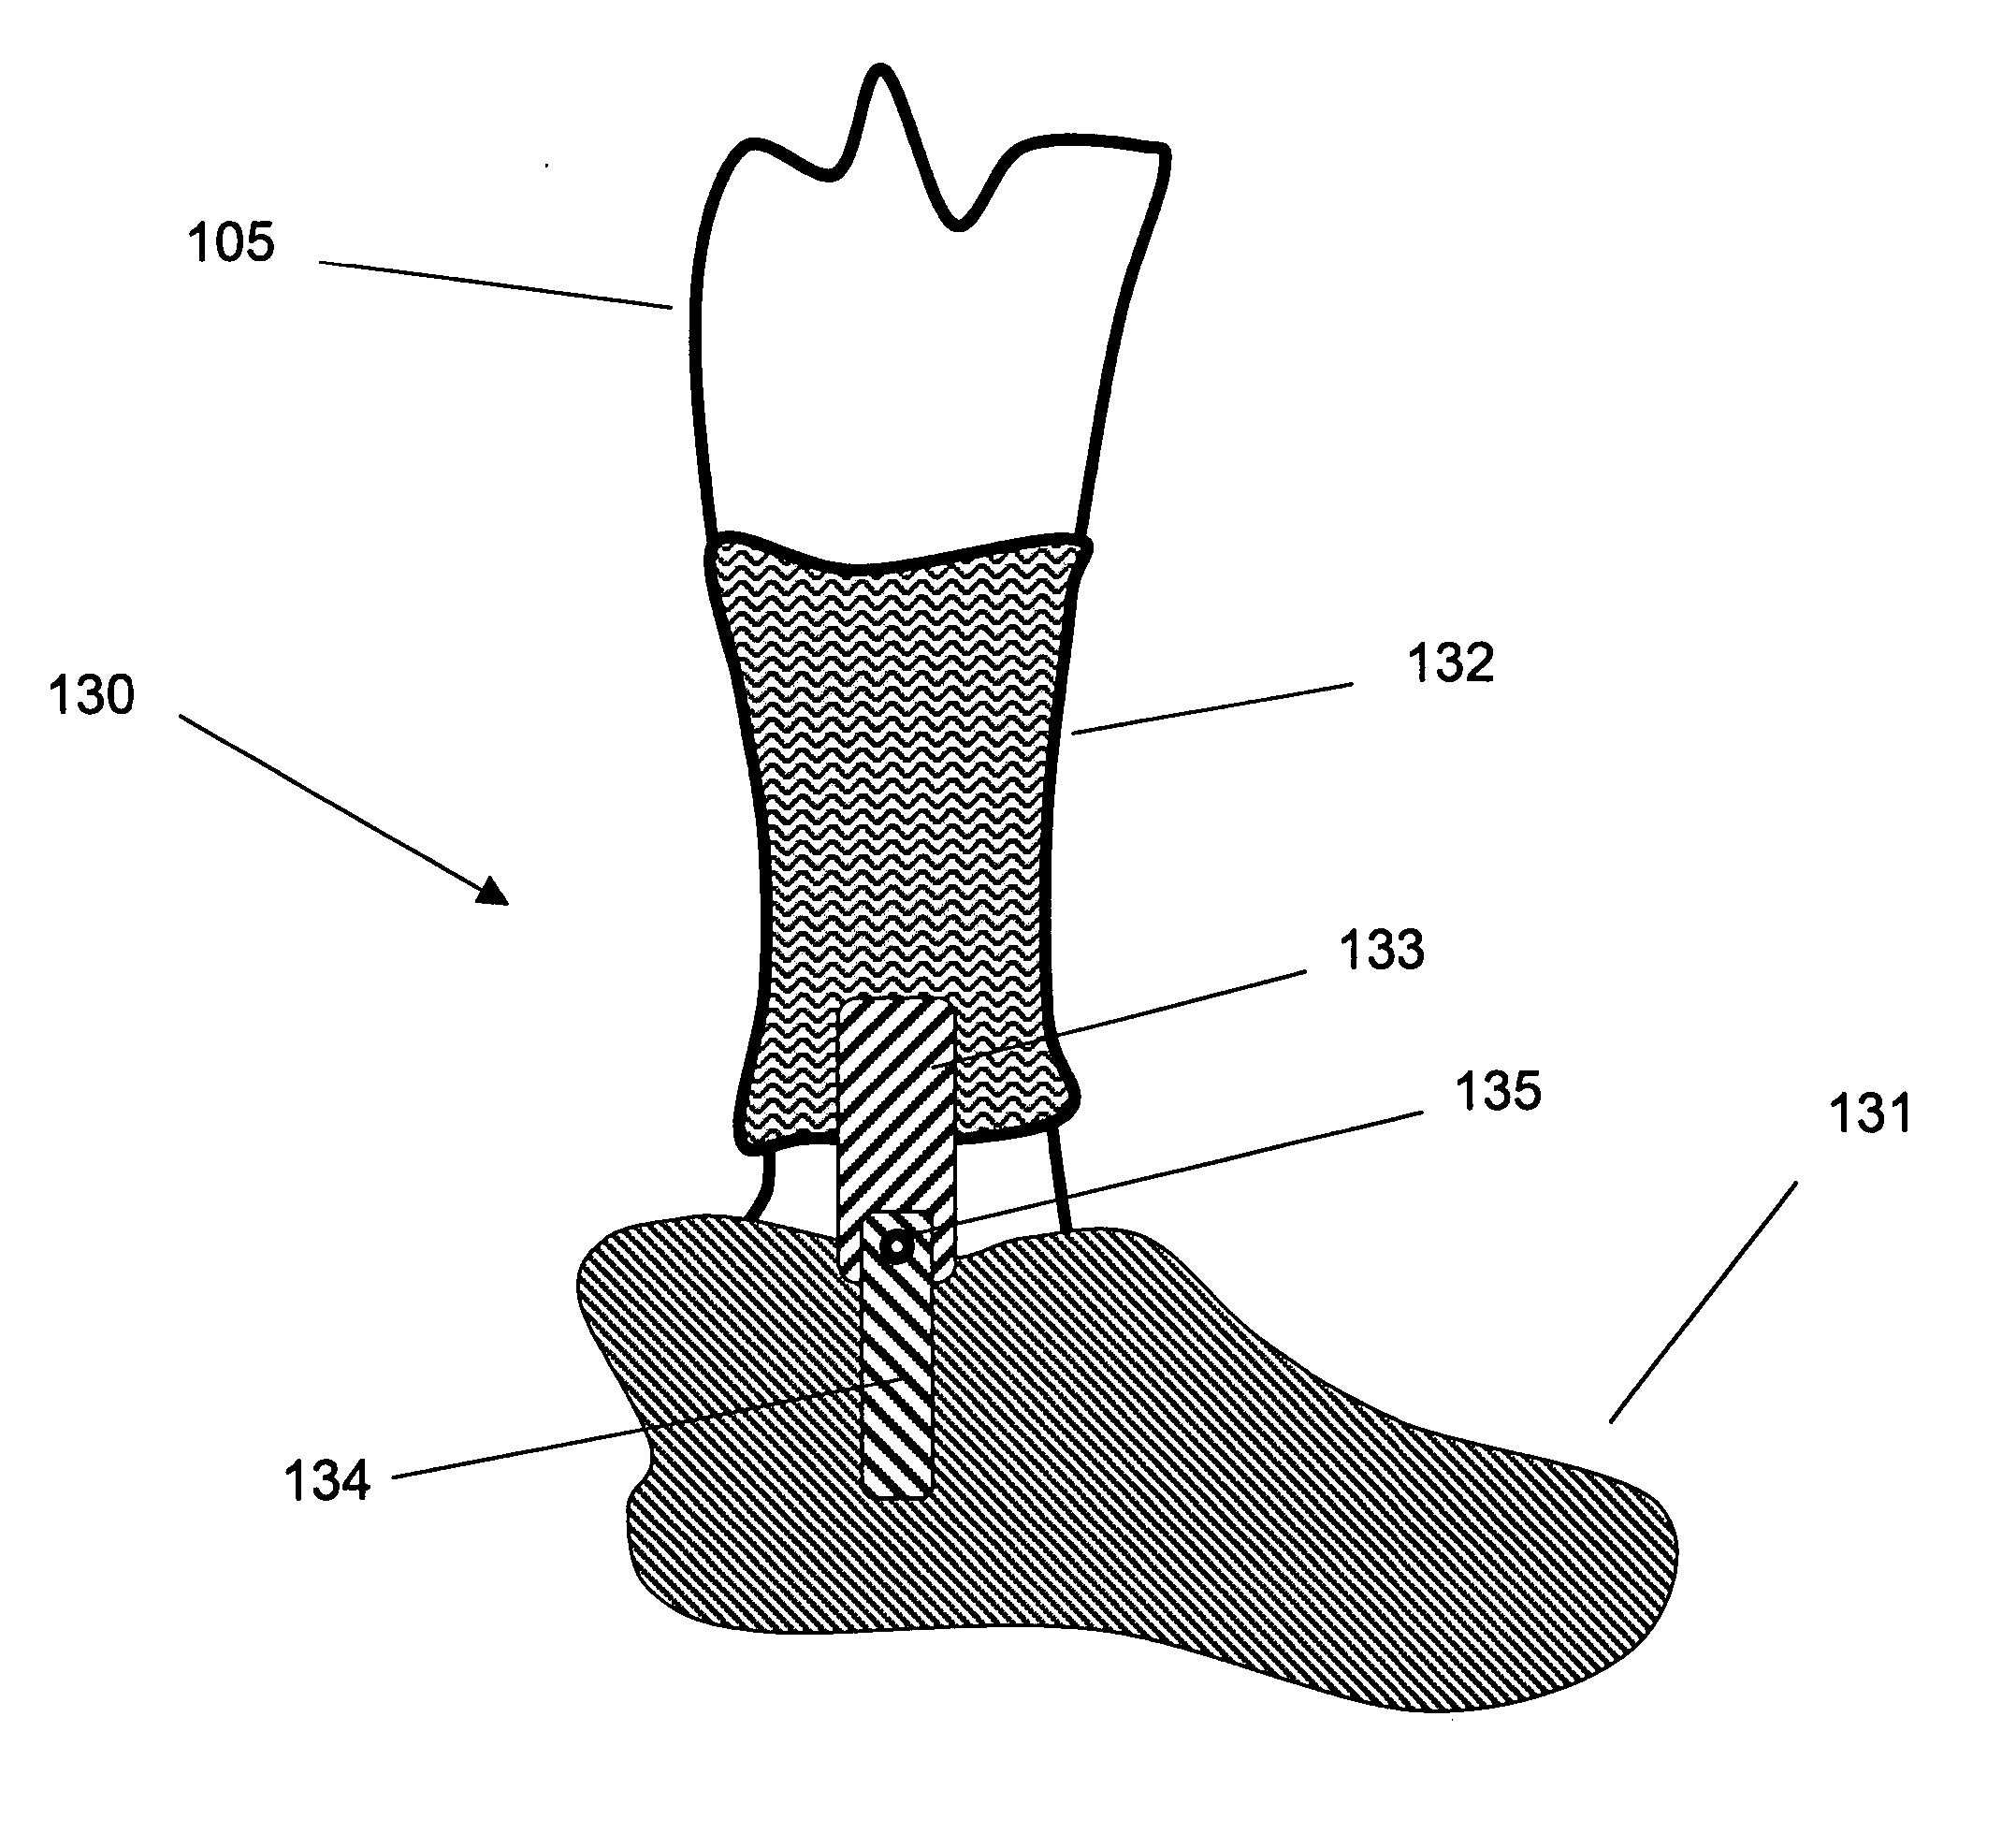 Walk-assist devices and methods